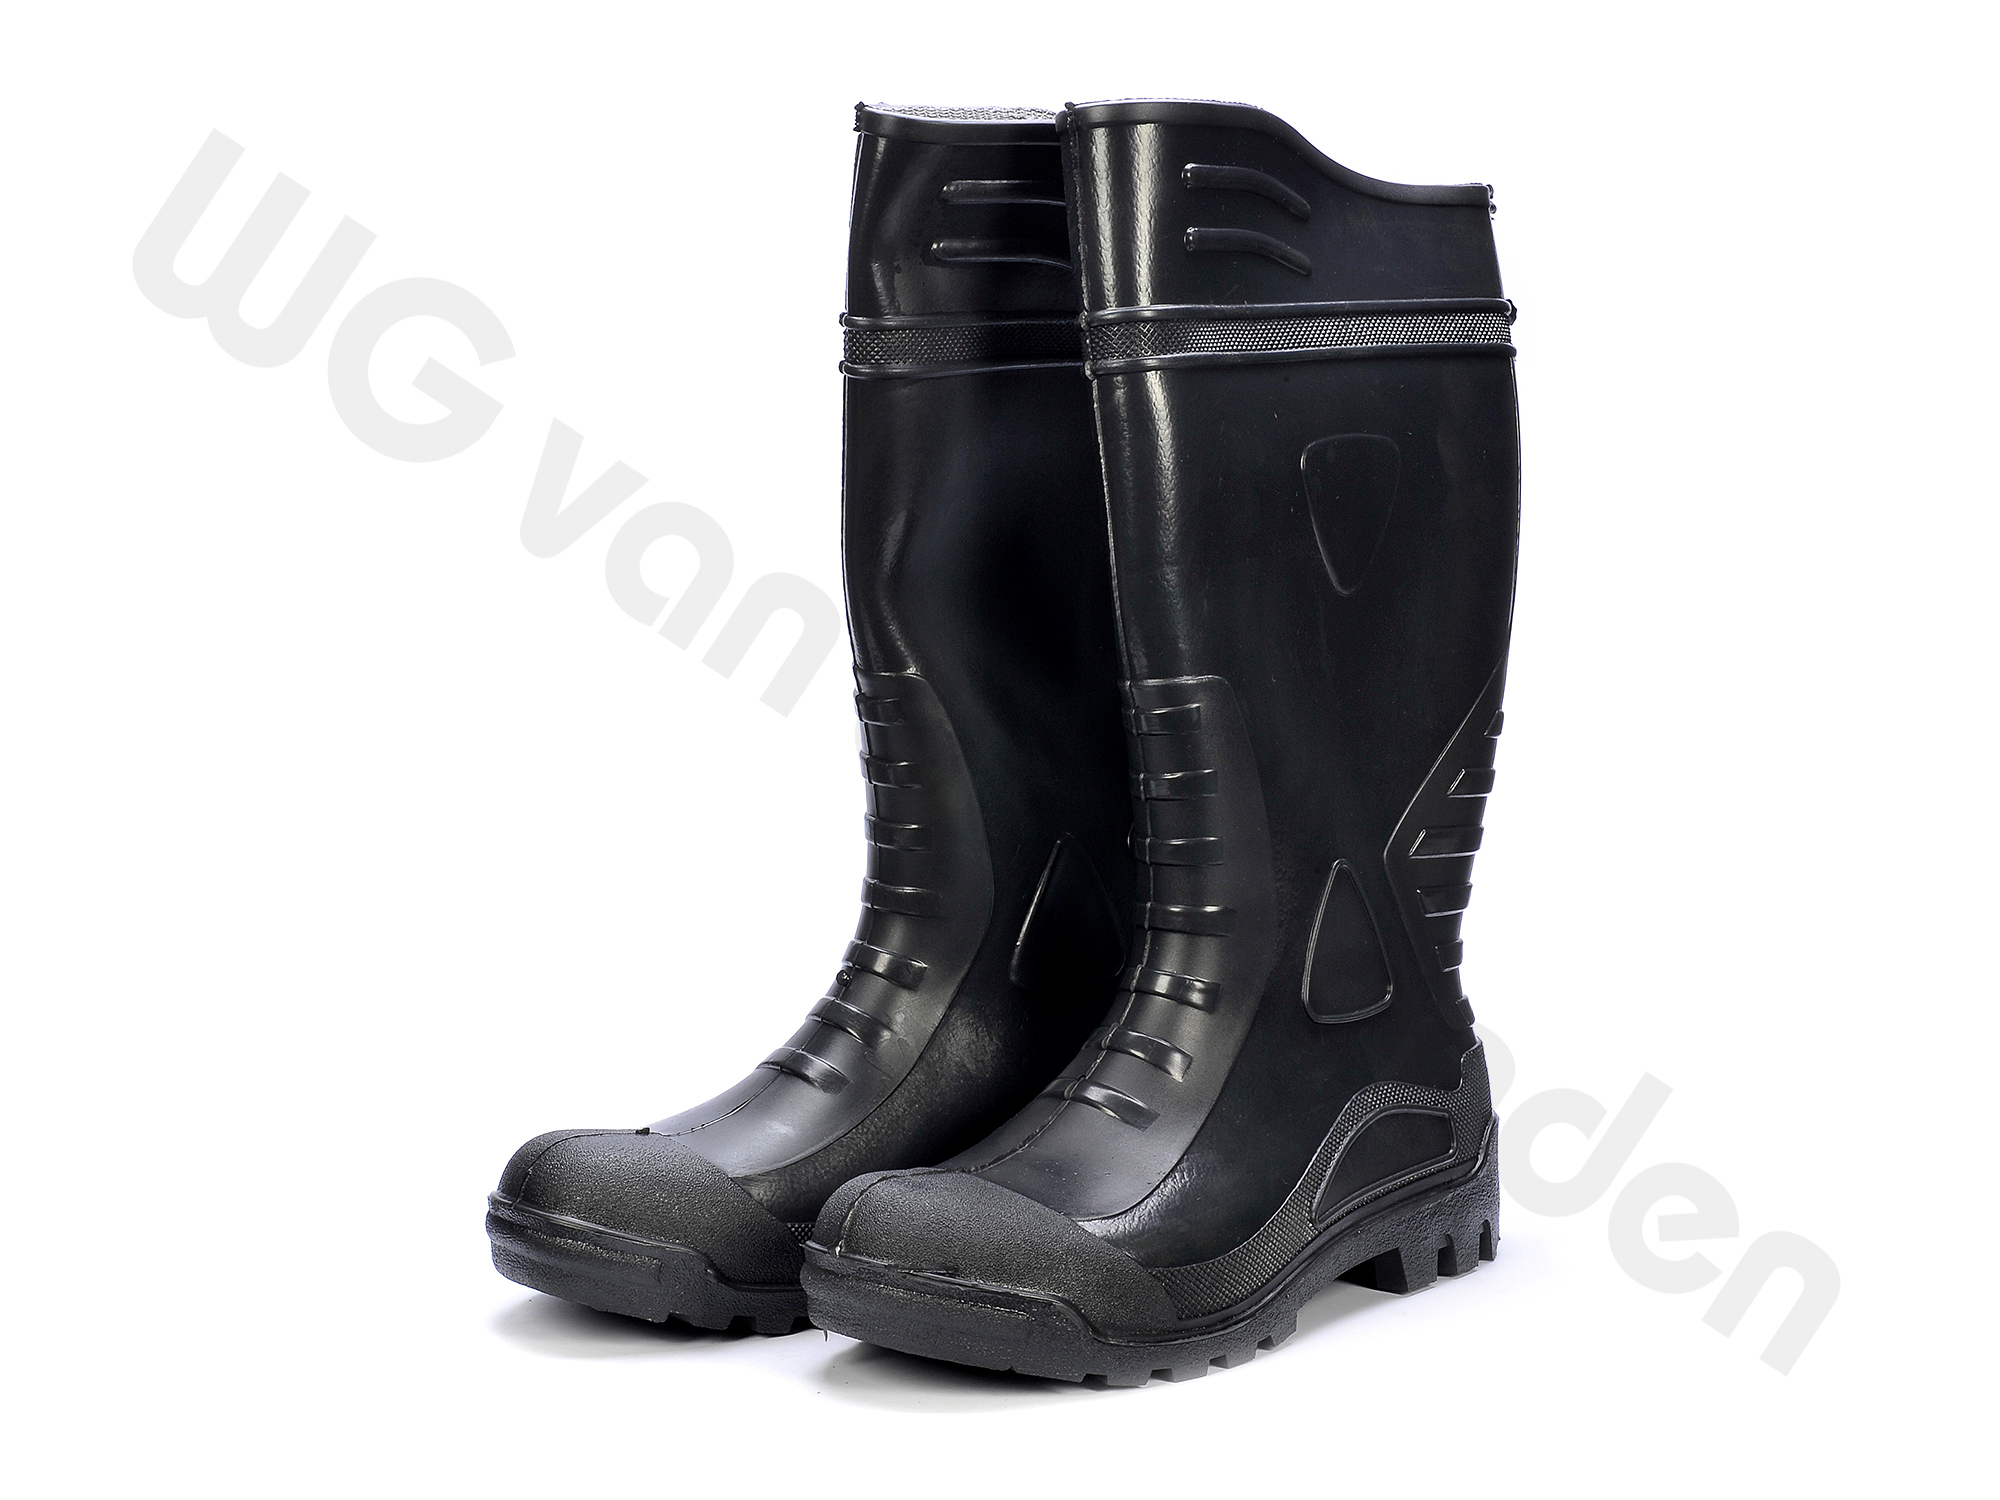 880206 BOOTS SAFETY S4 PVC WITH STEEL TOE SIZE 43/27.5CM CE